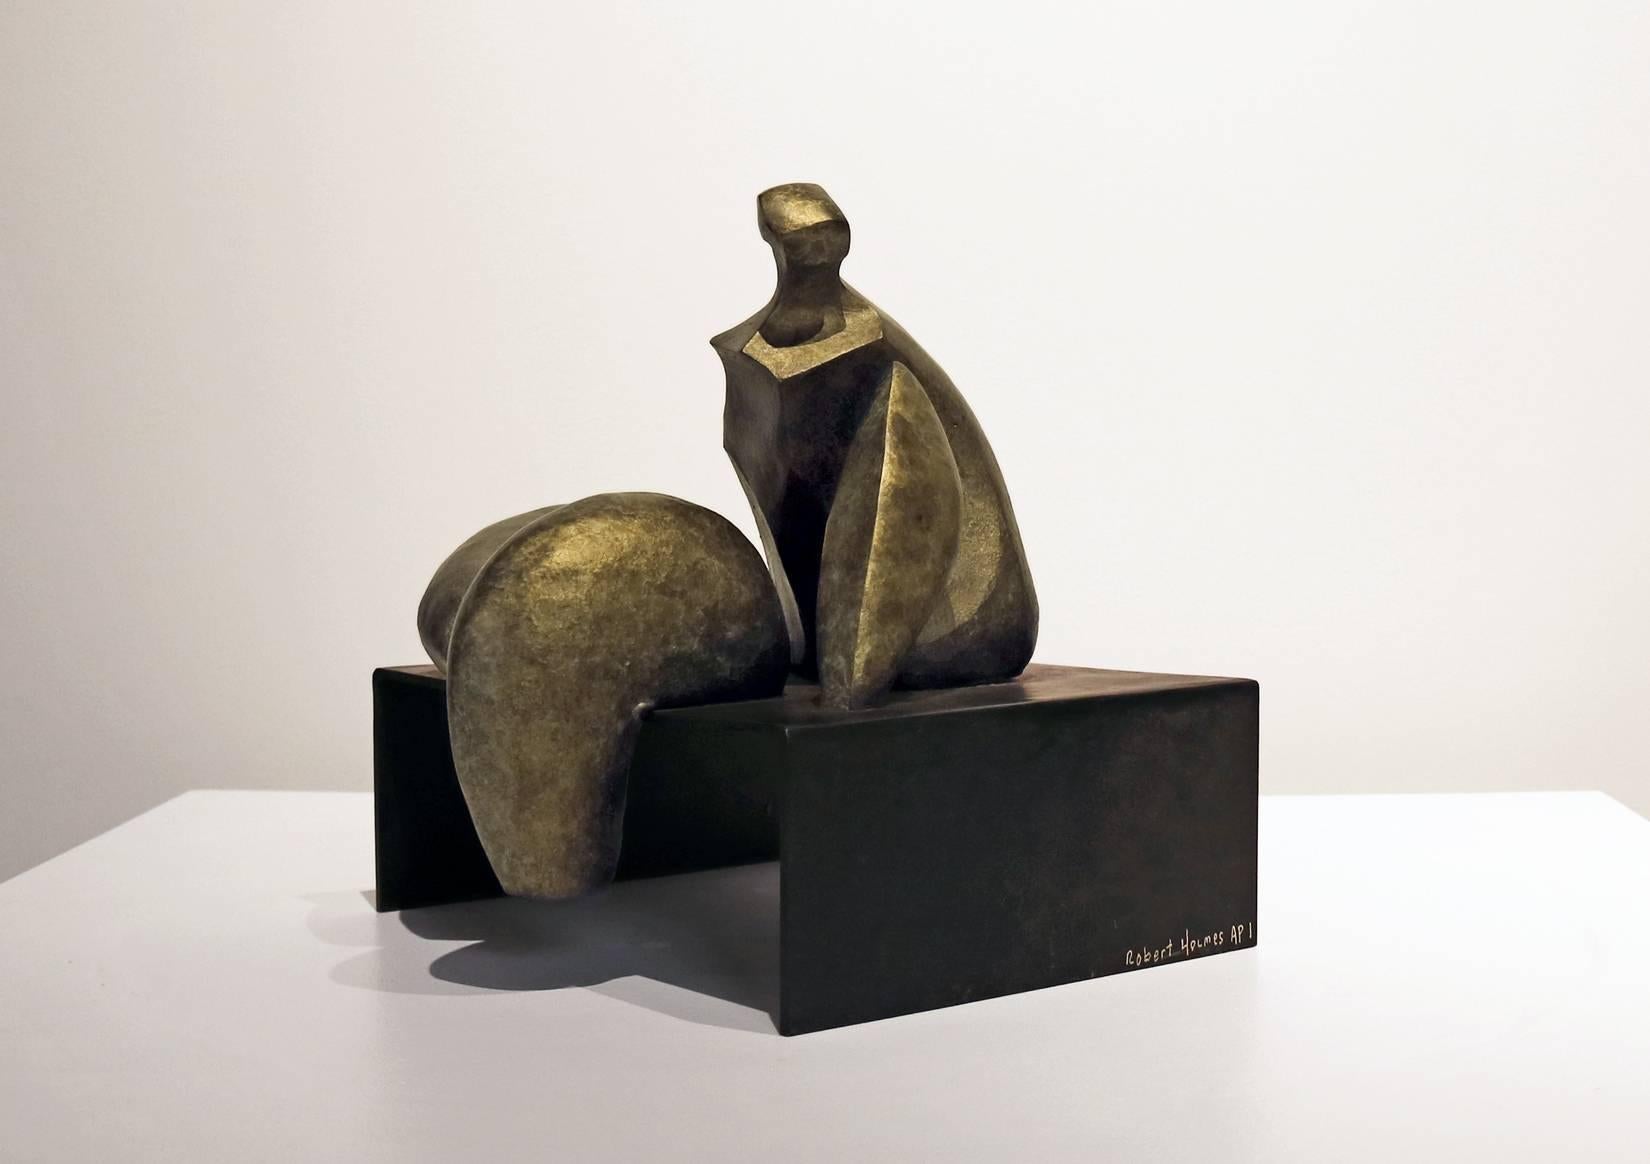 Artist's Proof in edition of 40. Sculpture is signed and edition number is inscribed.

Robert Holmes's sculpture has been exhibited over the past thirty-five years in the United States, Europe, and Asia. The artist obtained a Civil Engineering